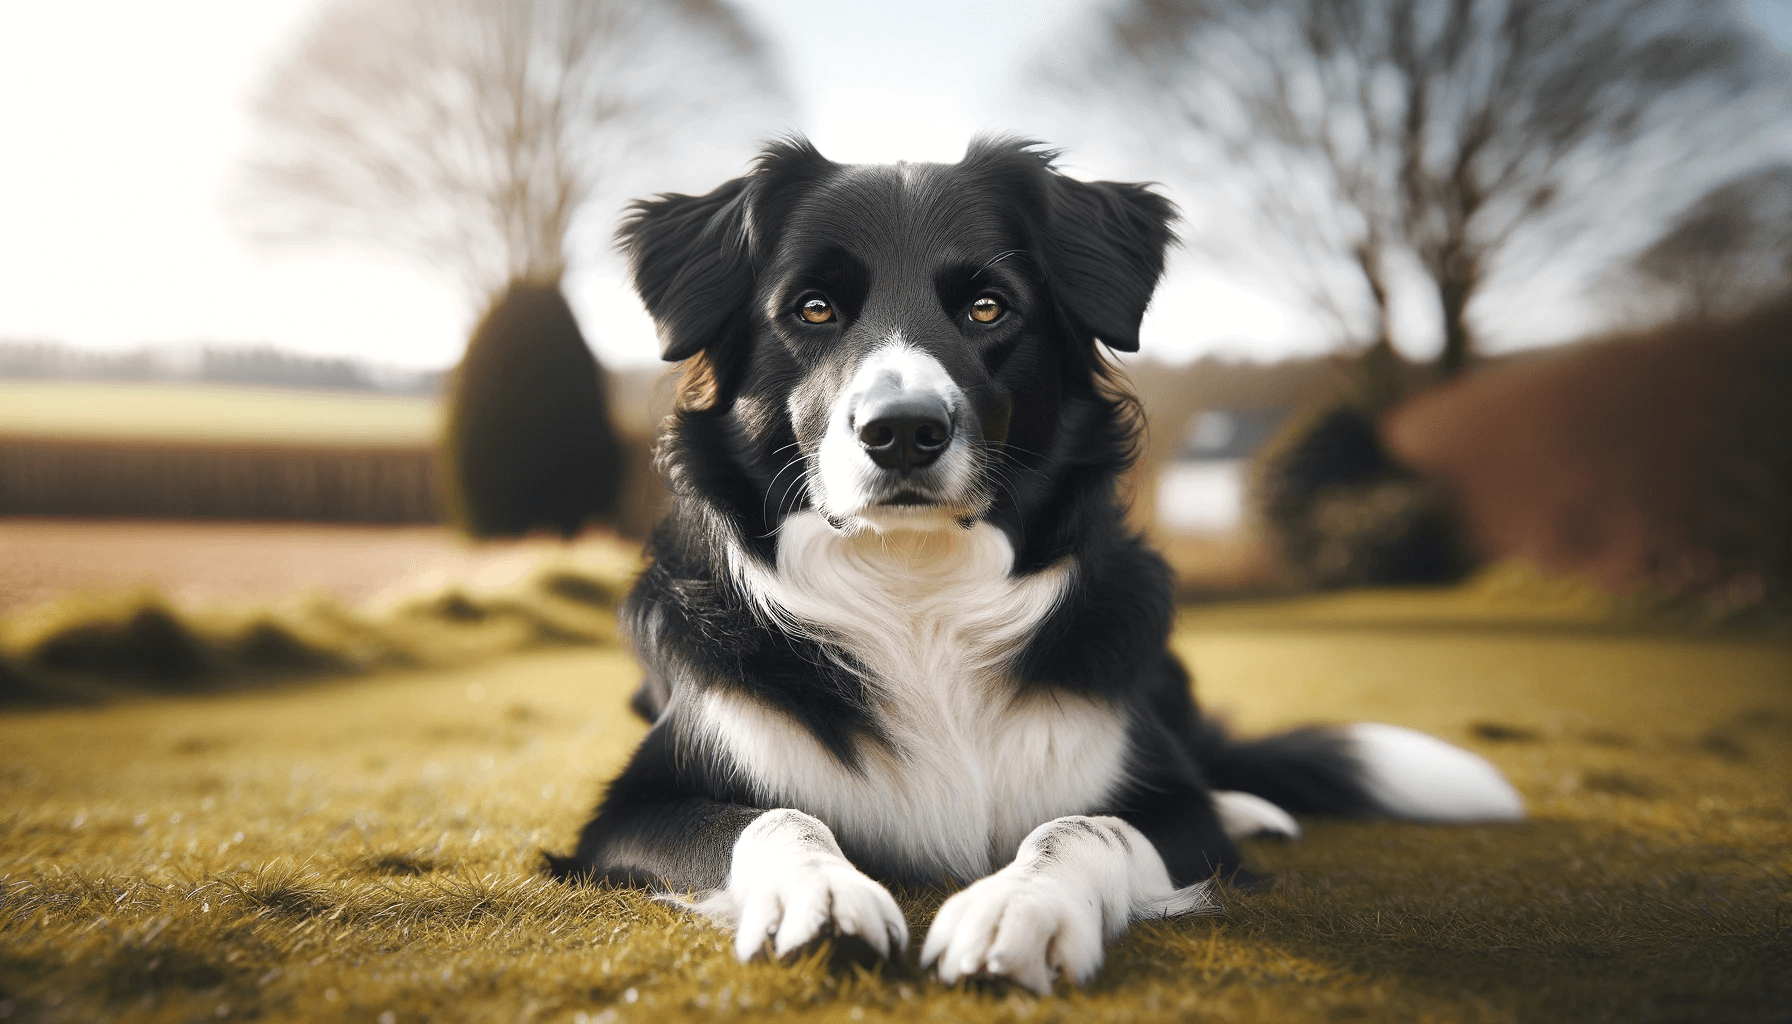 Borador Border Collie Lab Mix with a calm and confident expression lying on a grassy field. The dog's relaxed posture and attentive eyes reflect its temperament.